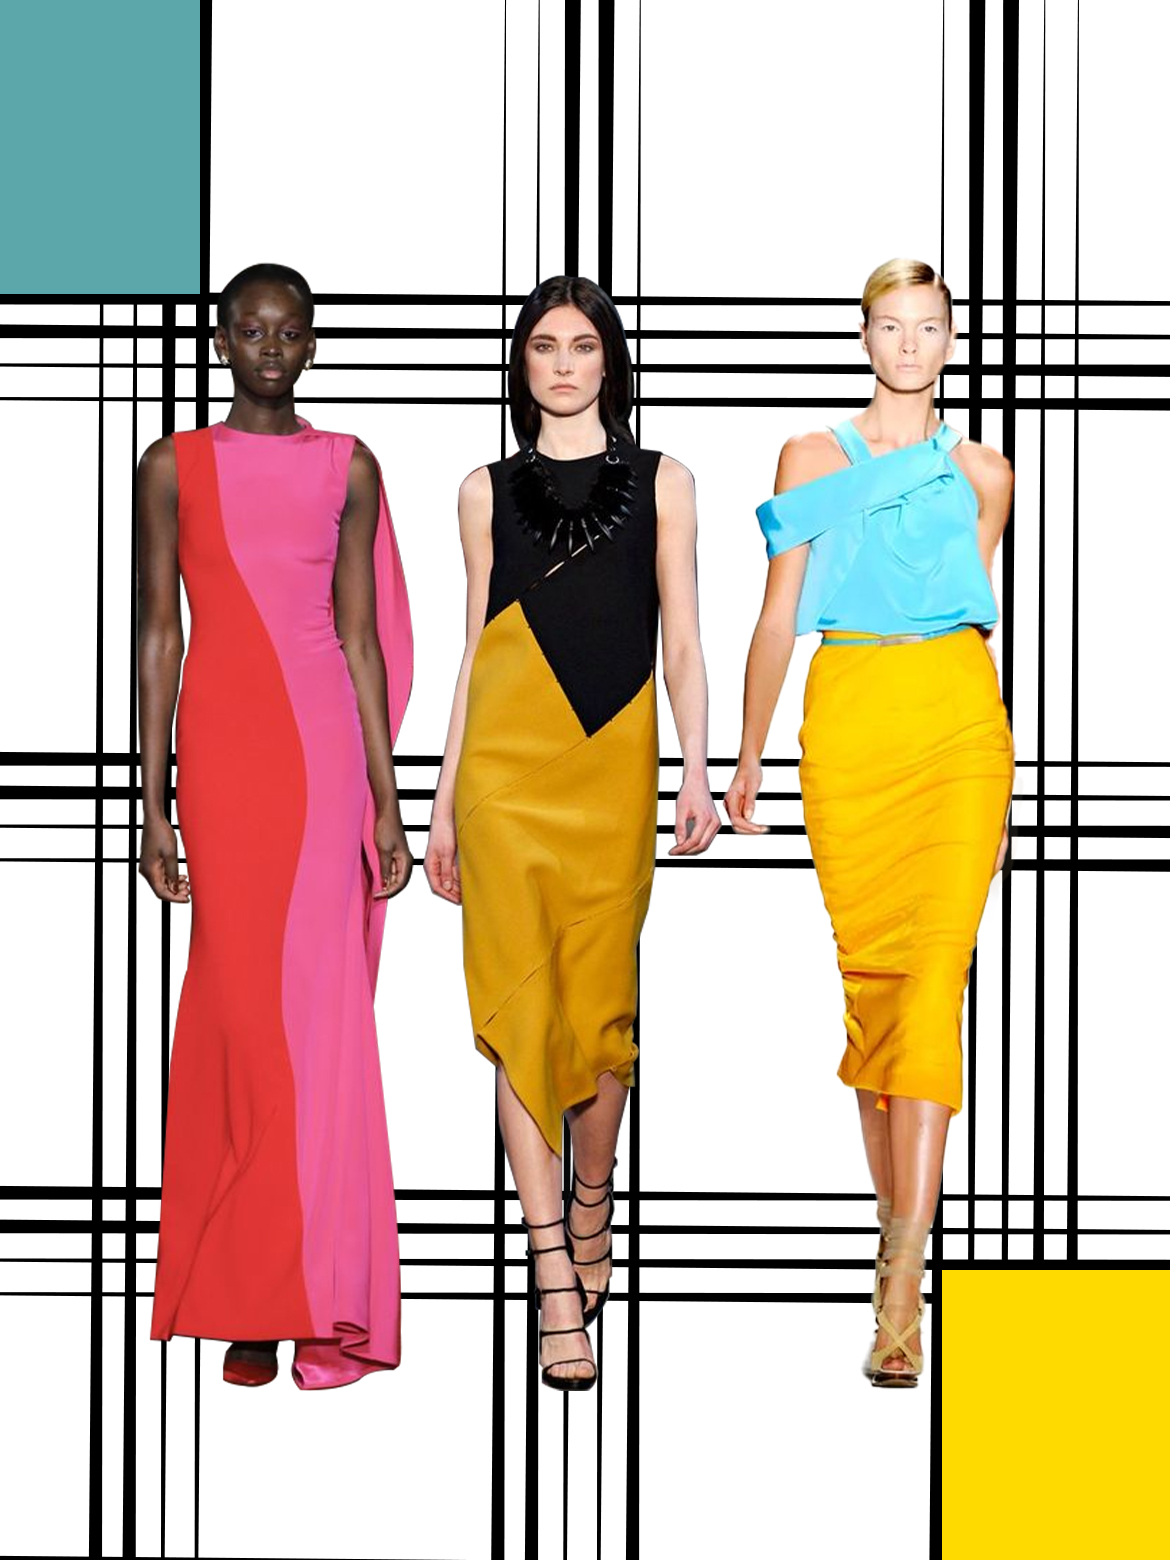 How to Wear Color Blocking Outfits? Color Block Fashion Style